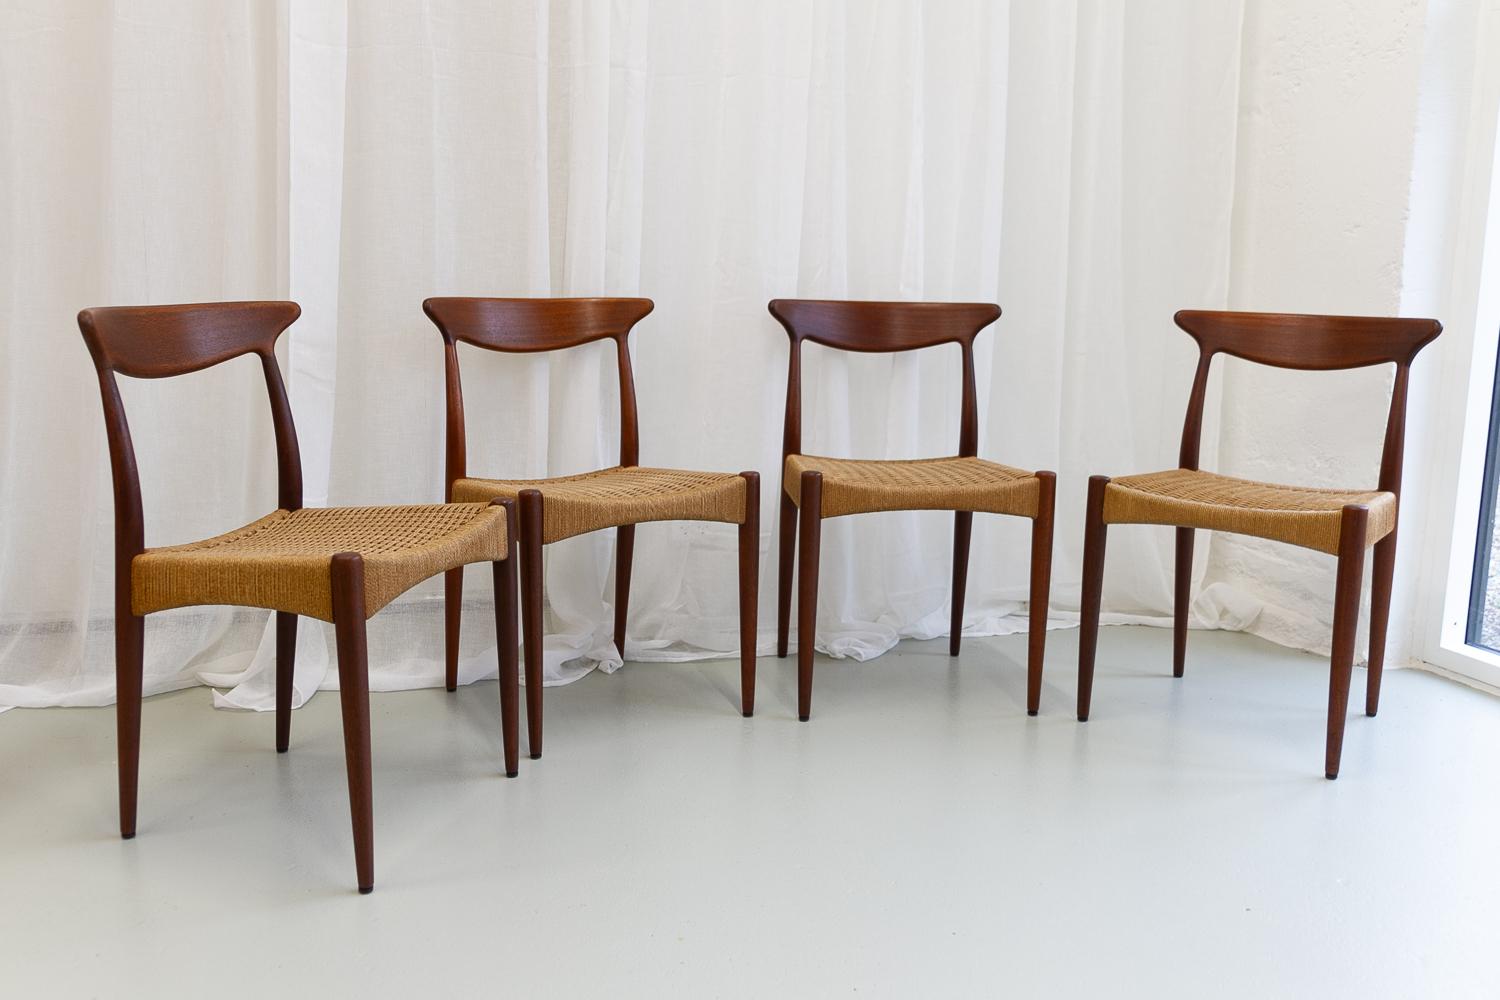 Danish Modern Teak Chairs by Arne Hovmand-Olsen for Mogens Kold, Denmark, 1950s. Set of 4
Elegant and sculptural dining room chairs in solid teak with original paper cord seats. Designed in 1951 as model MK310 by renowned Danish architect A. Hovmand